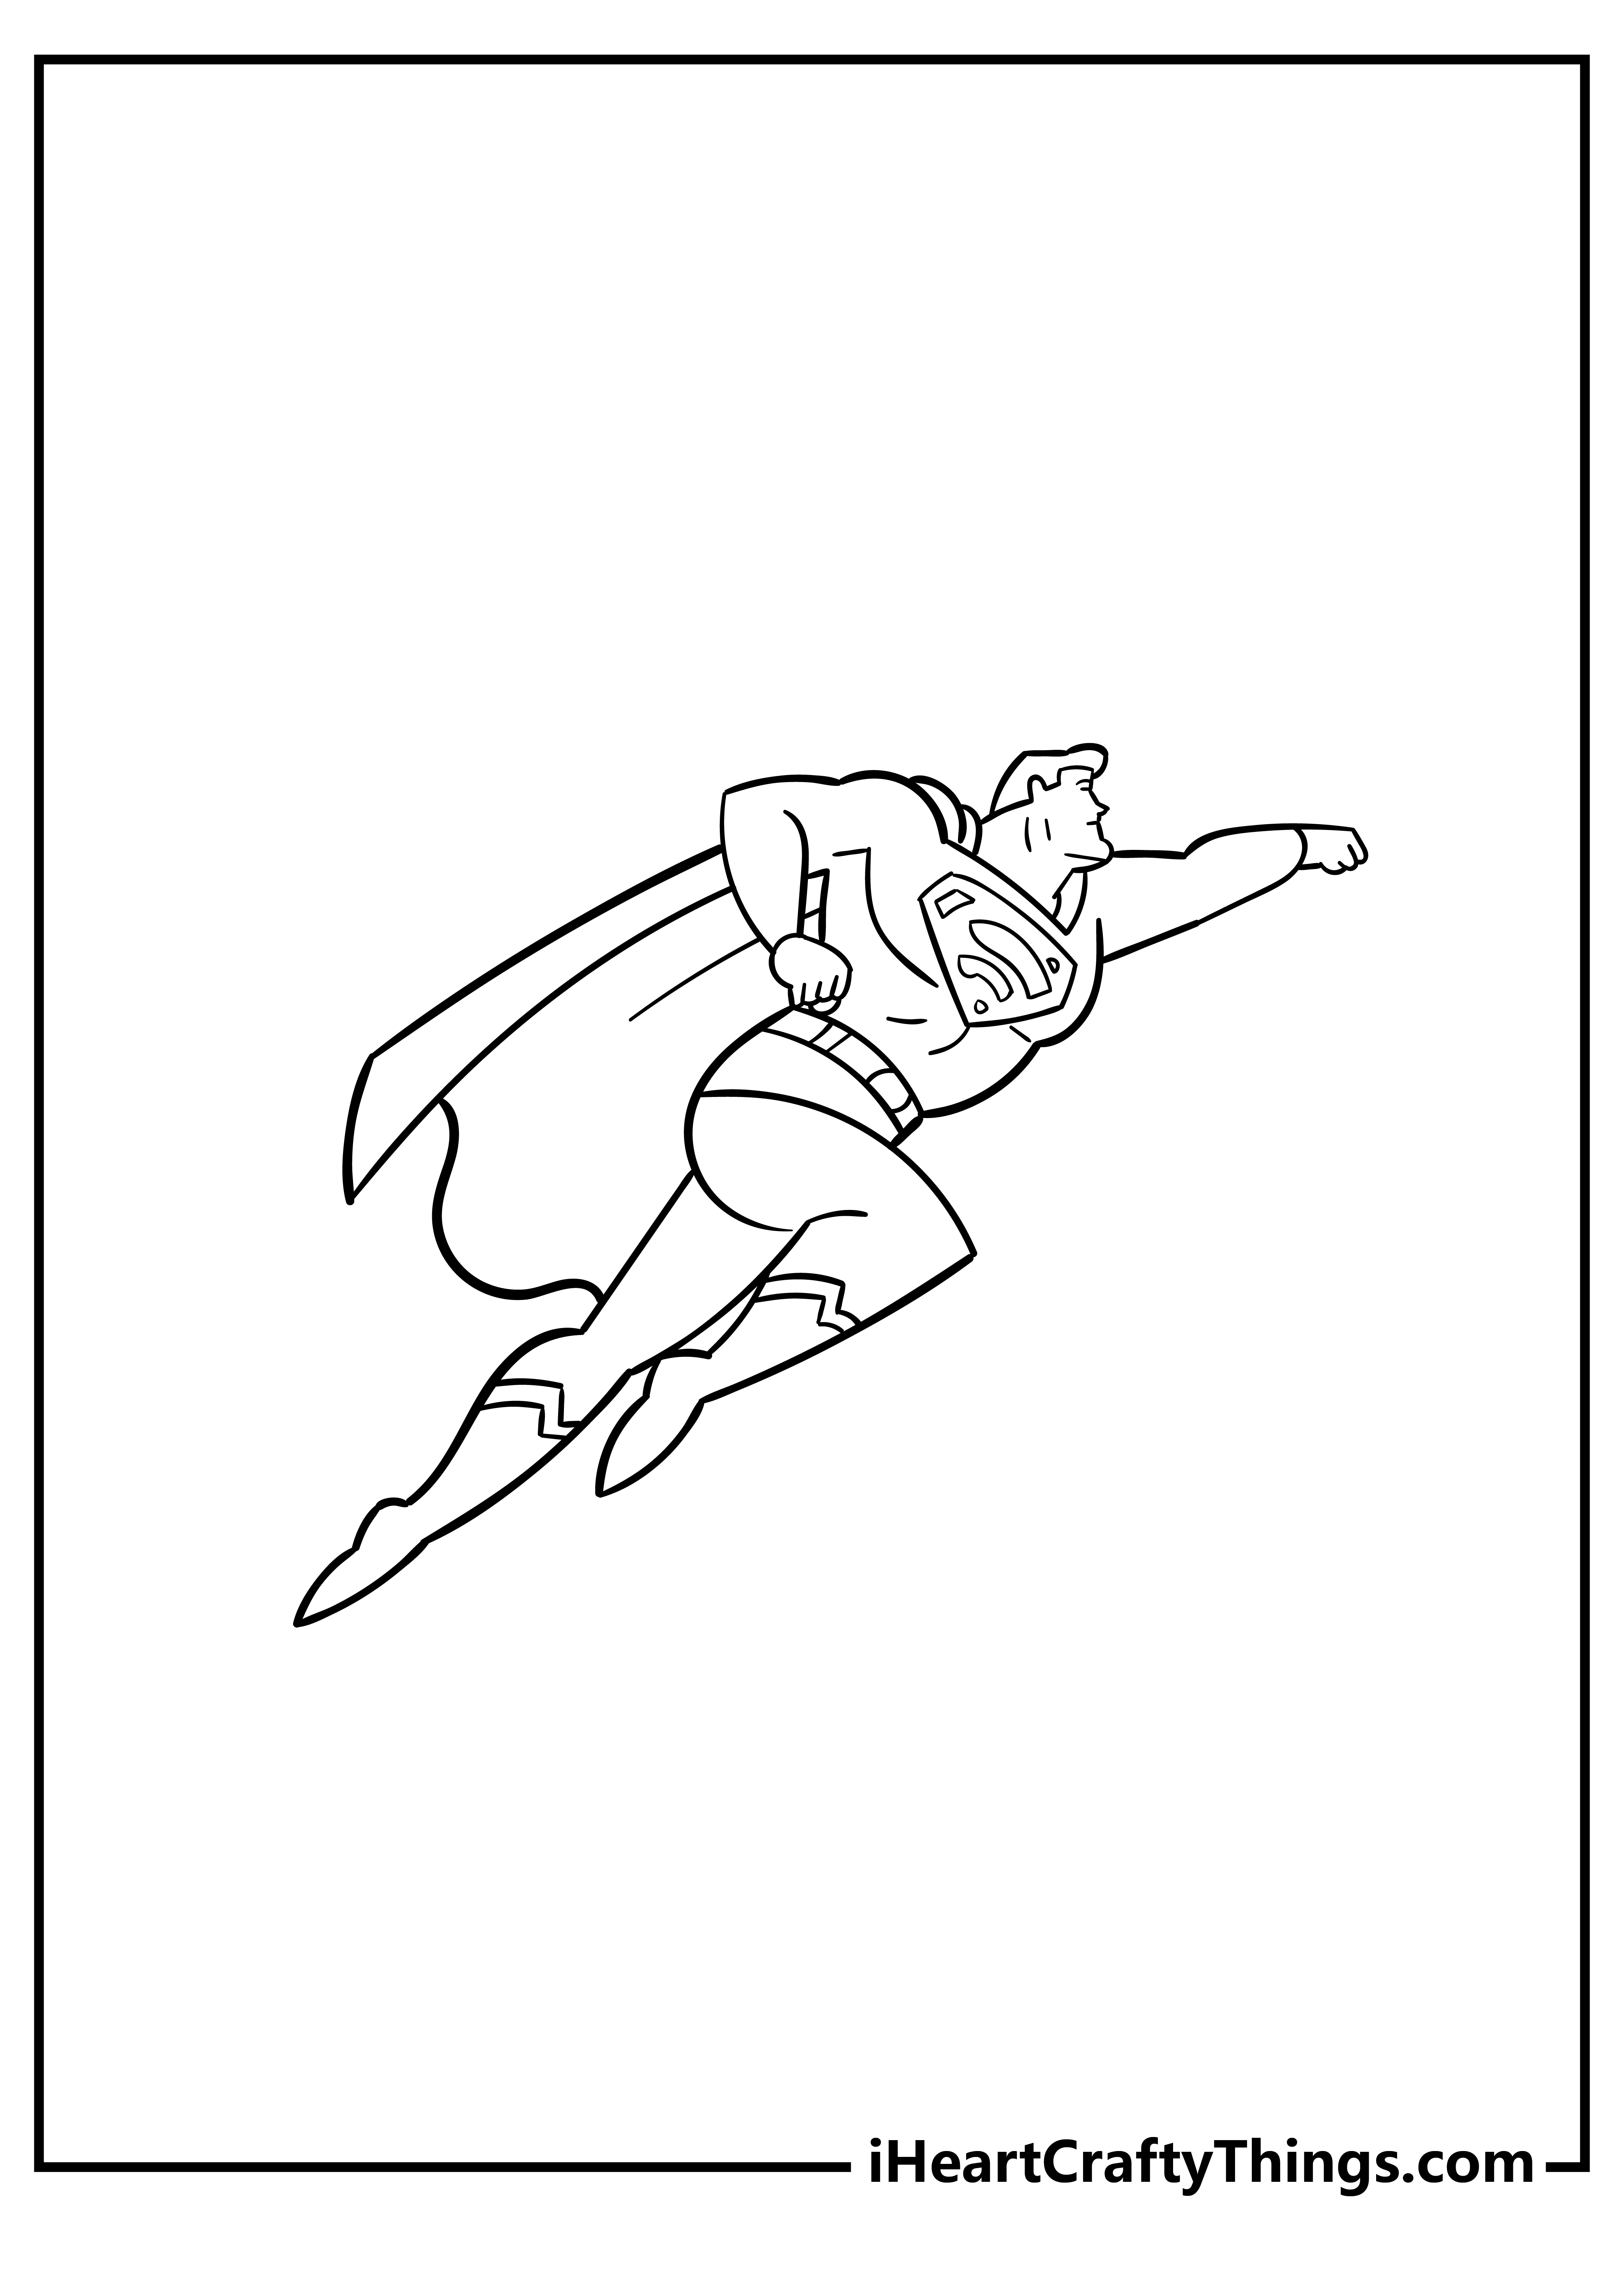 Superman Coloring Pages for kids free download